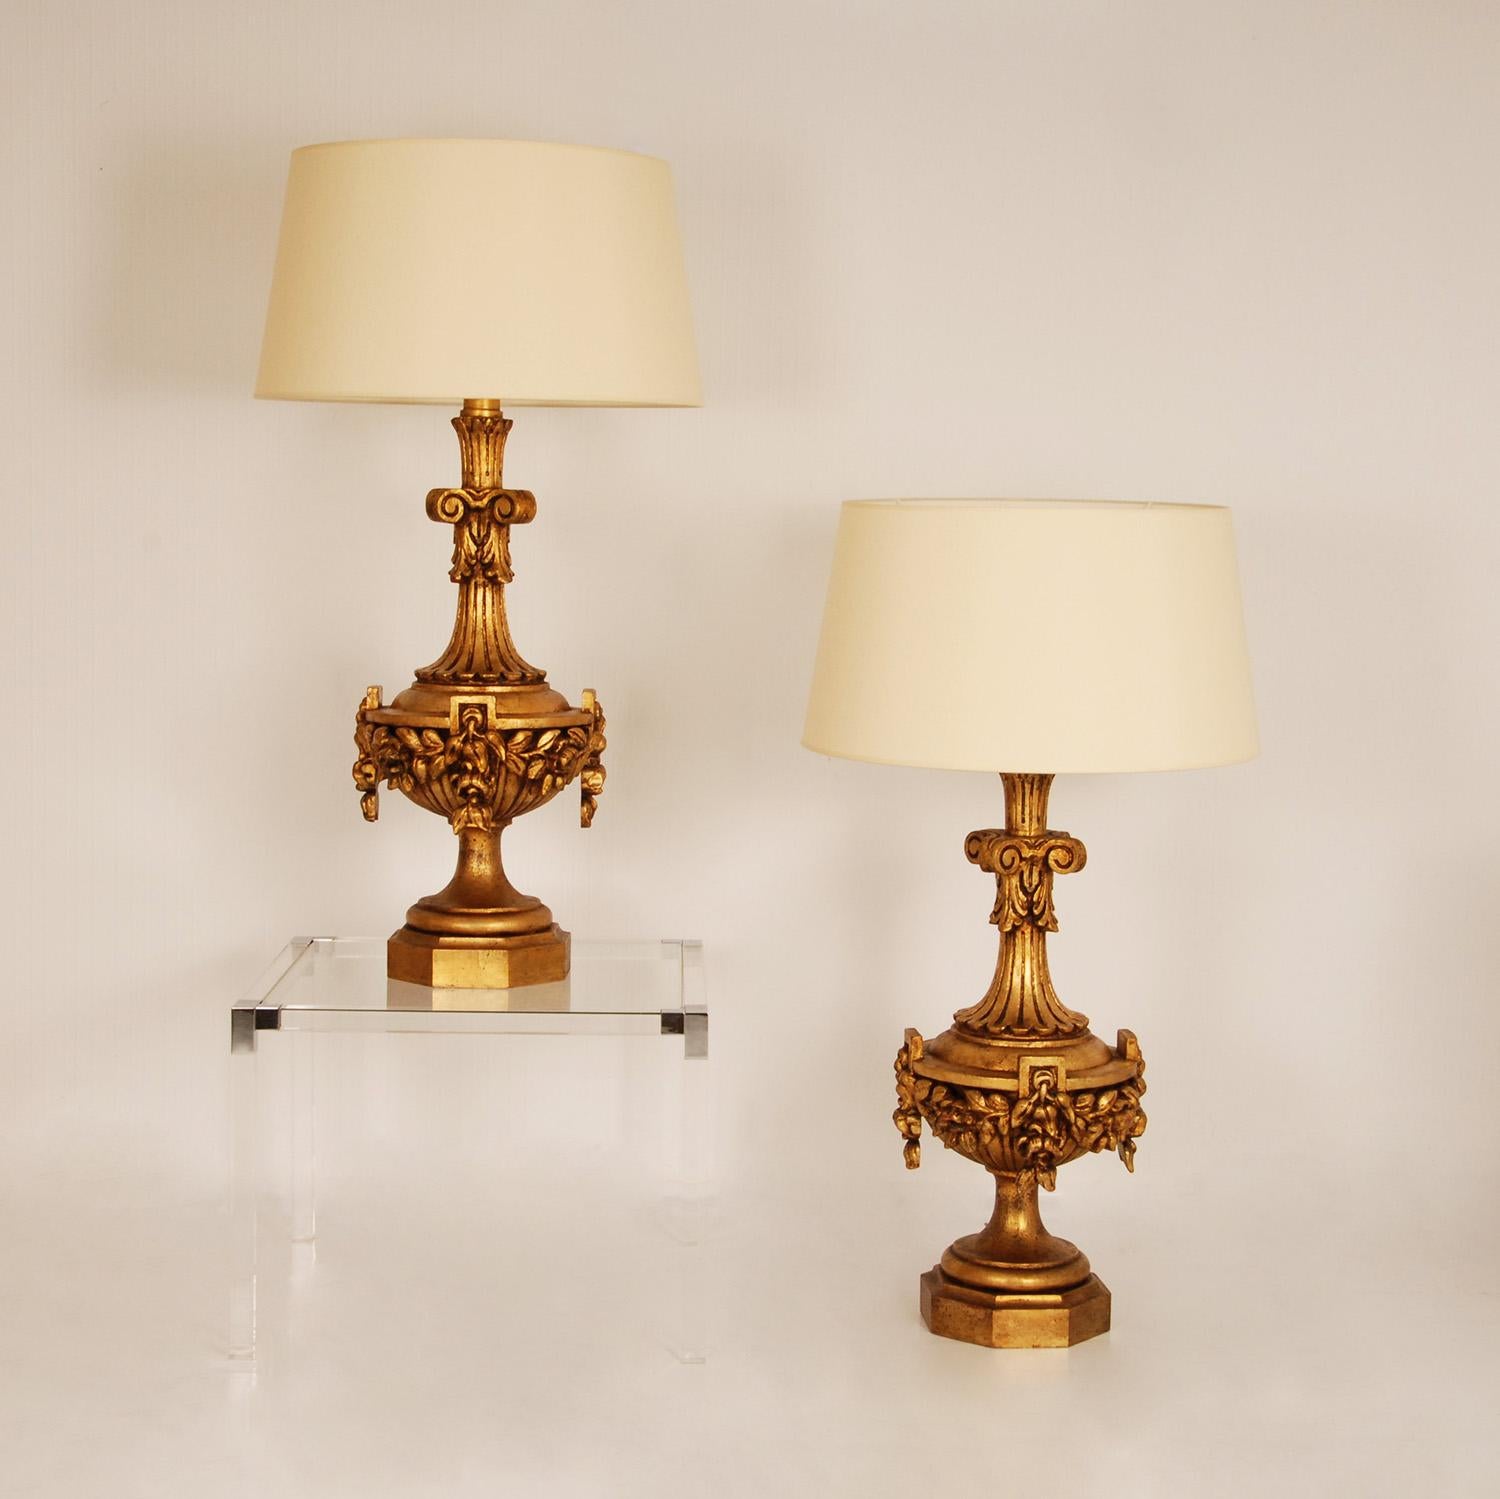 Vintage Italian Gold Giltwood Lamps Carved Neoclassal Vases  Table Lamps a Pair In Good Condition For Sale In Wommelgem, VAN